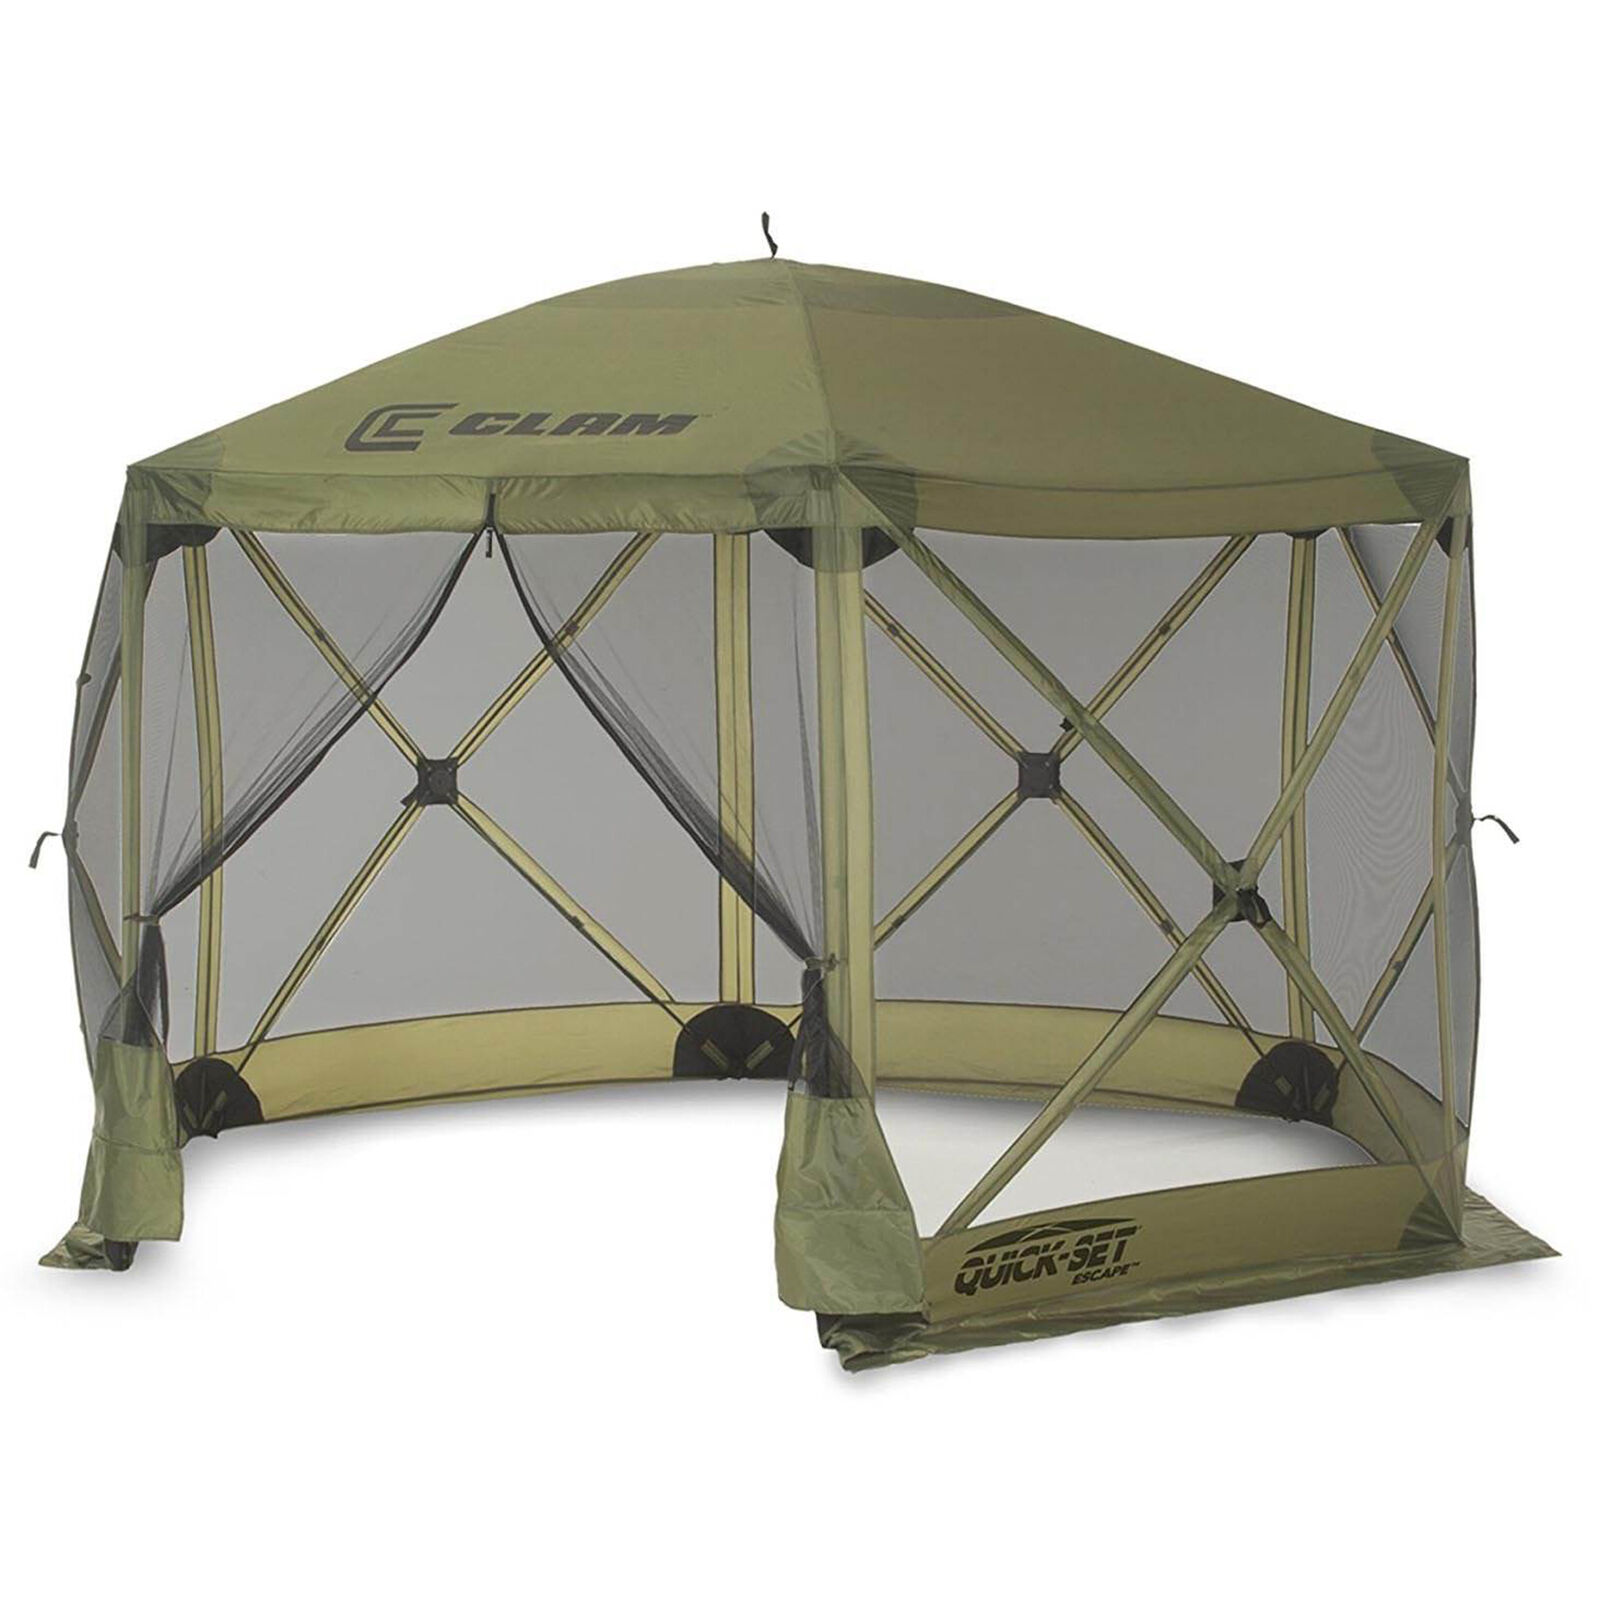 Clam Quick Set Escape Portable Canopy Shelter with Wind & Sun Panels, (2 pack)